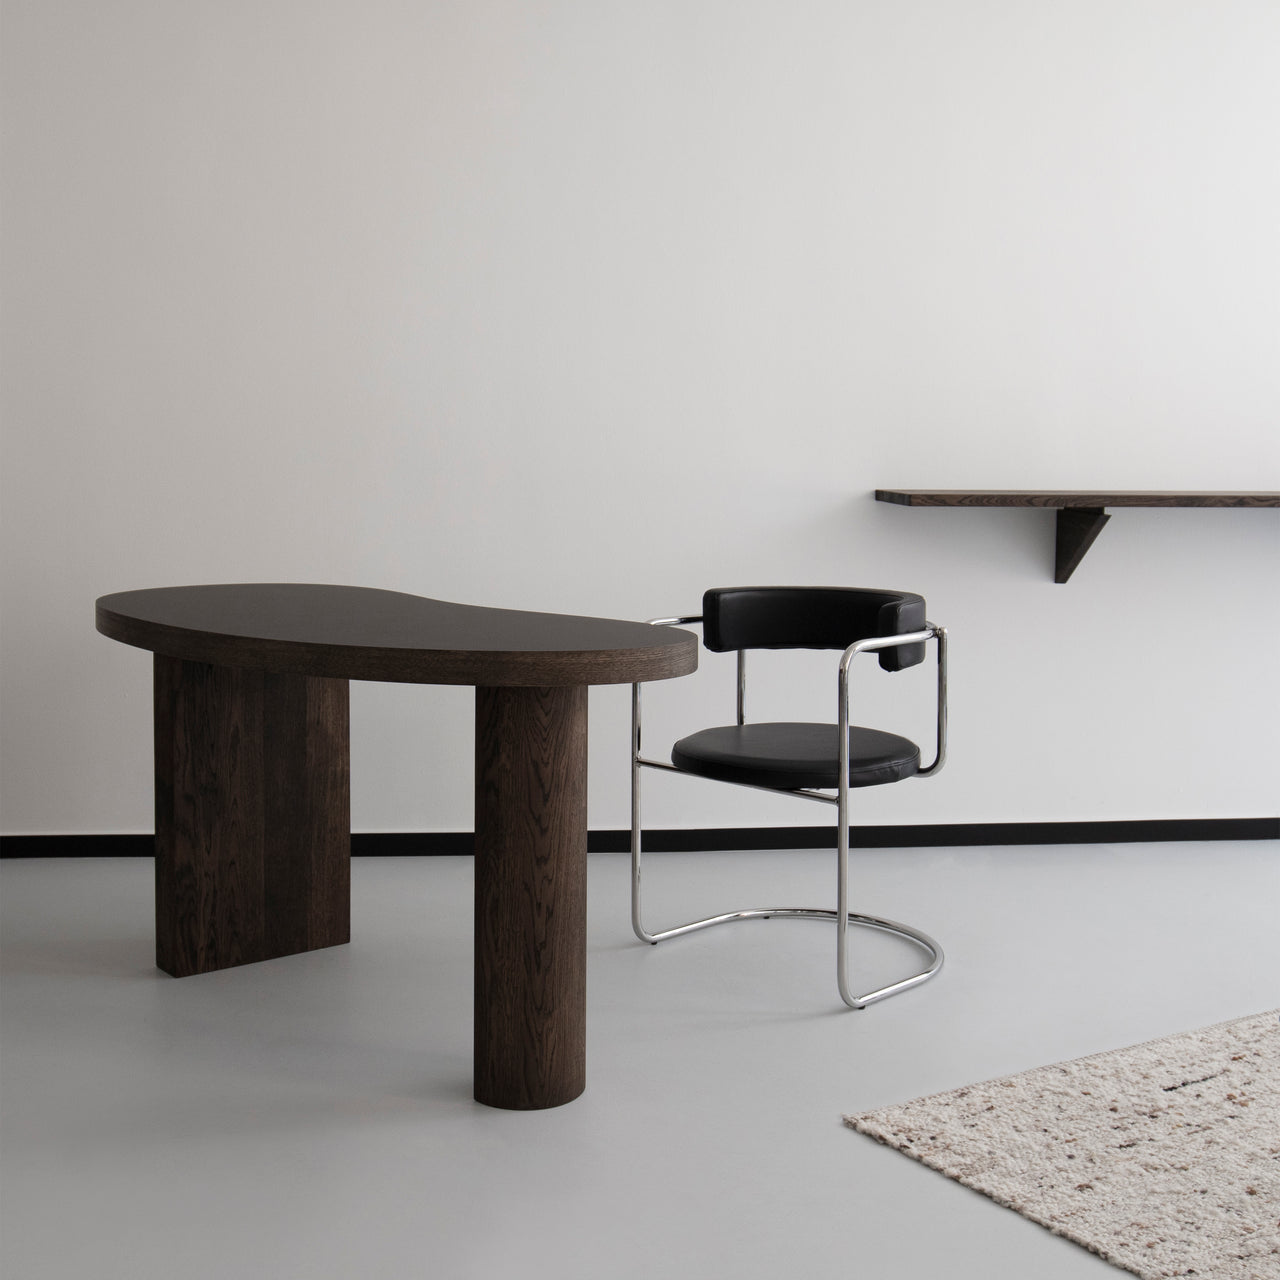 FF Chair: Cantilever